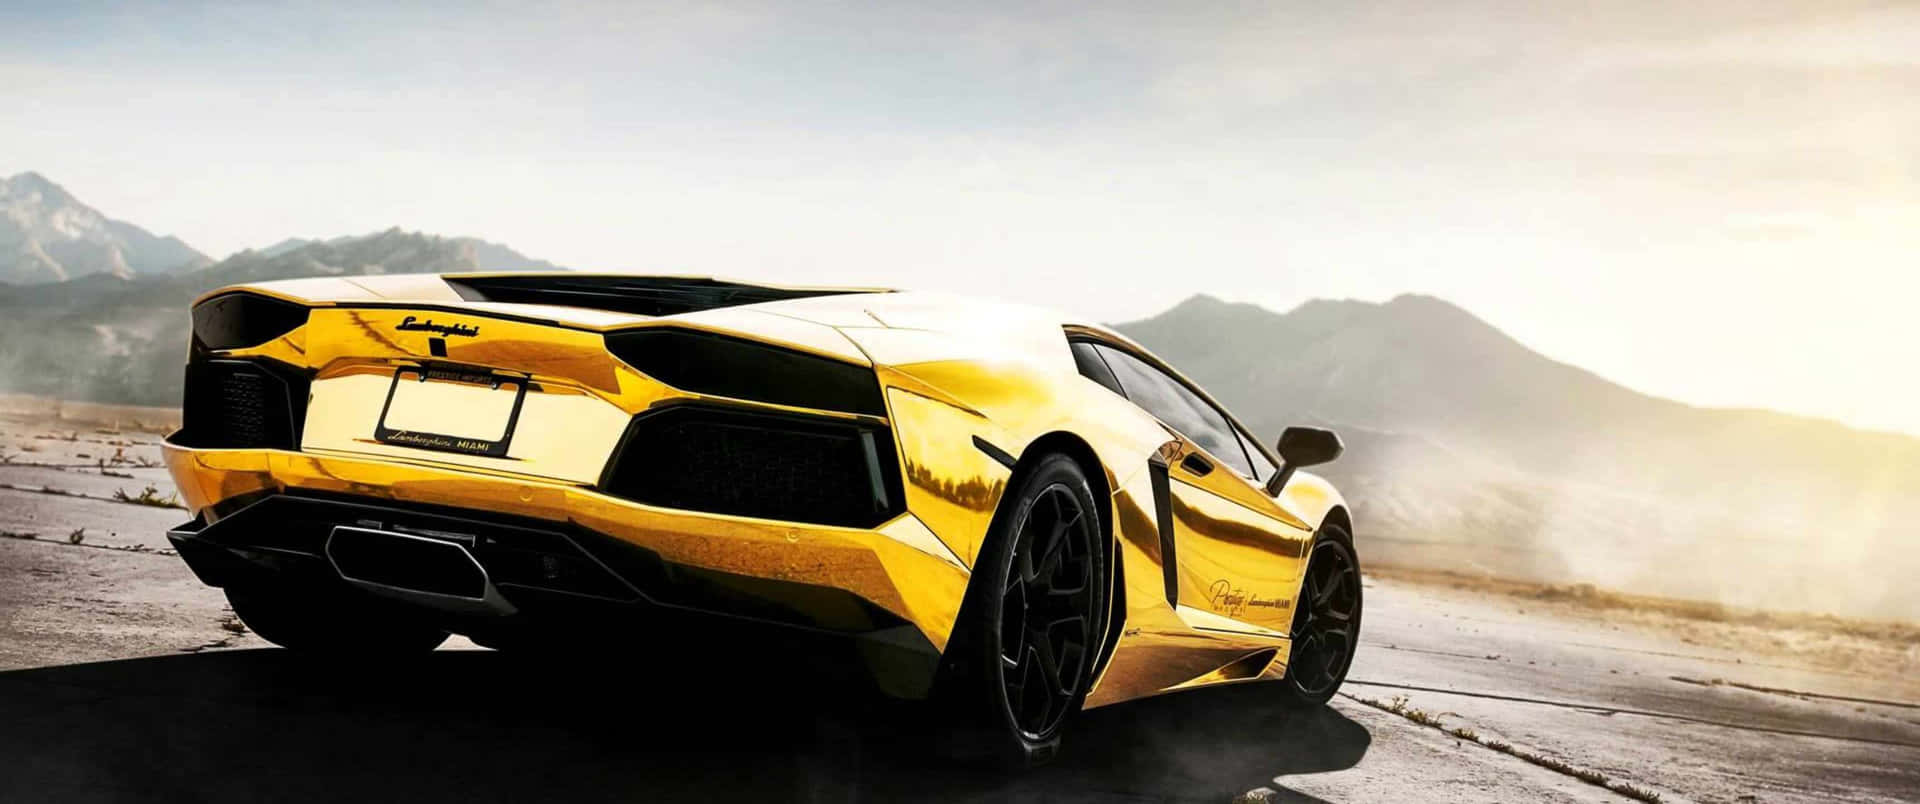 Experience the luxury and power of Lamborghini at 3440x1440p